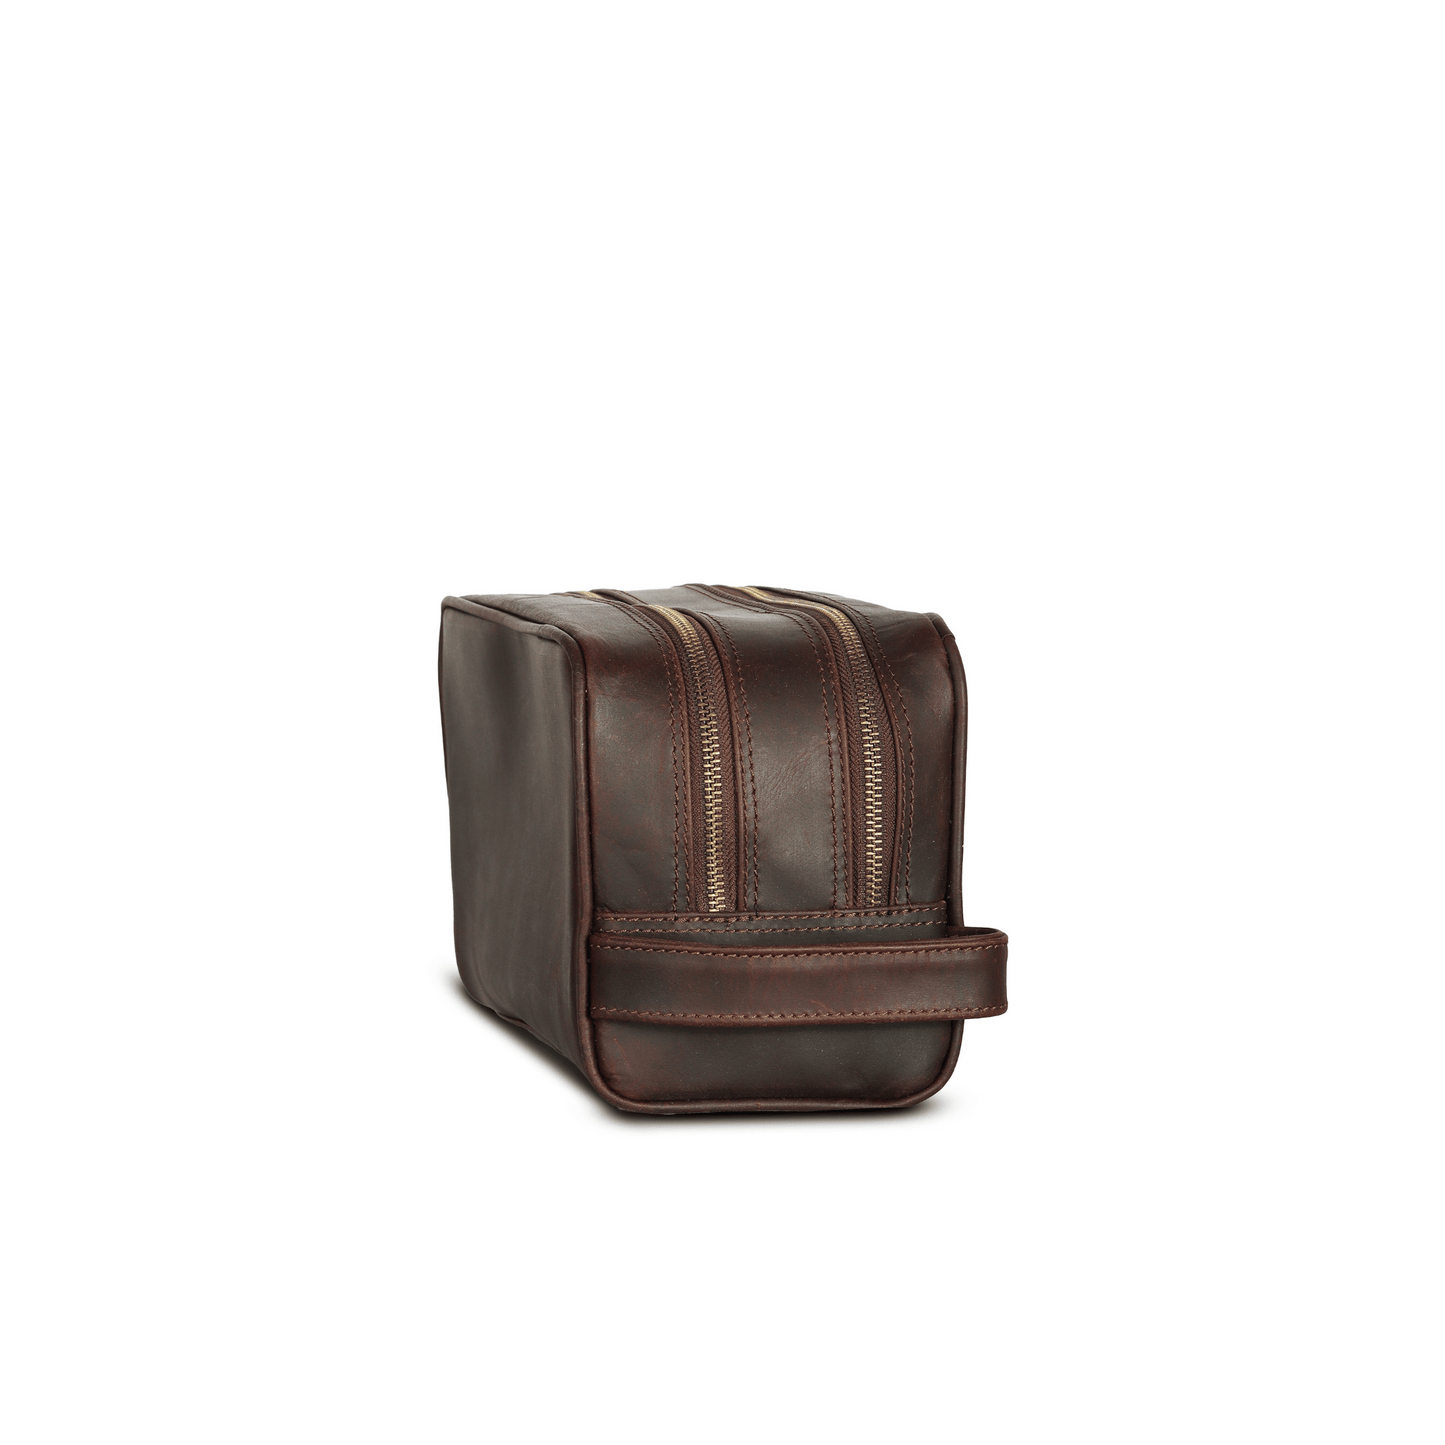 Travel Refresh Genuine Leather Tolietry Bag Muddy Brown